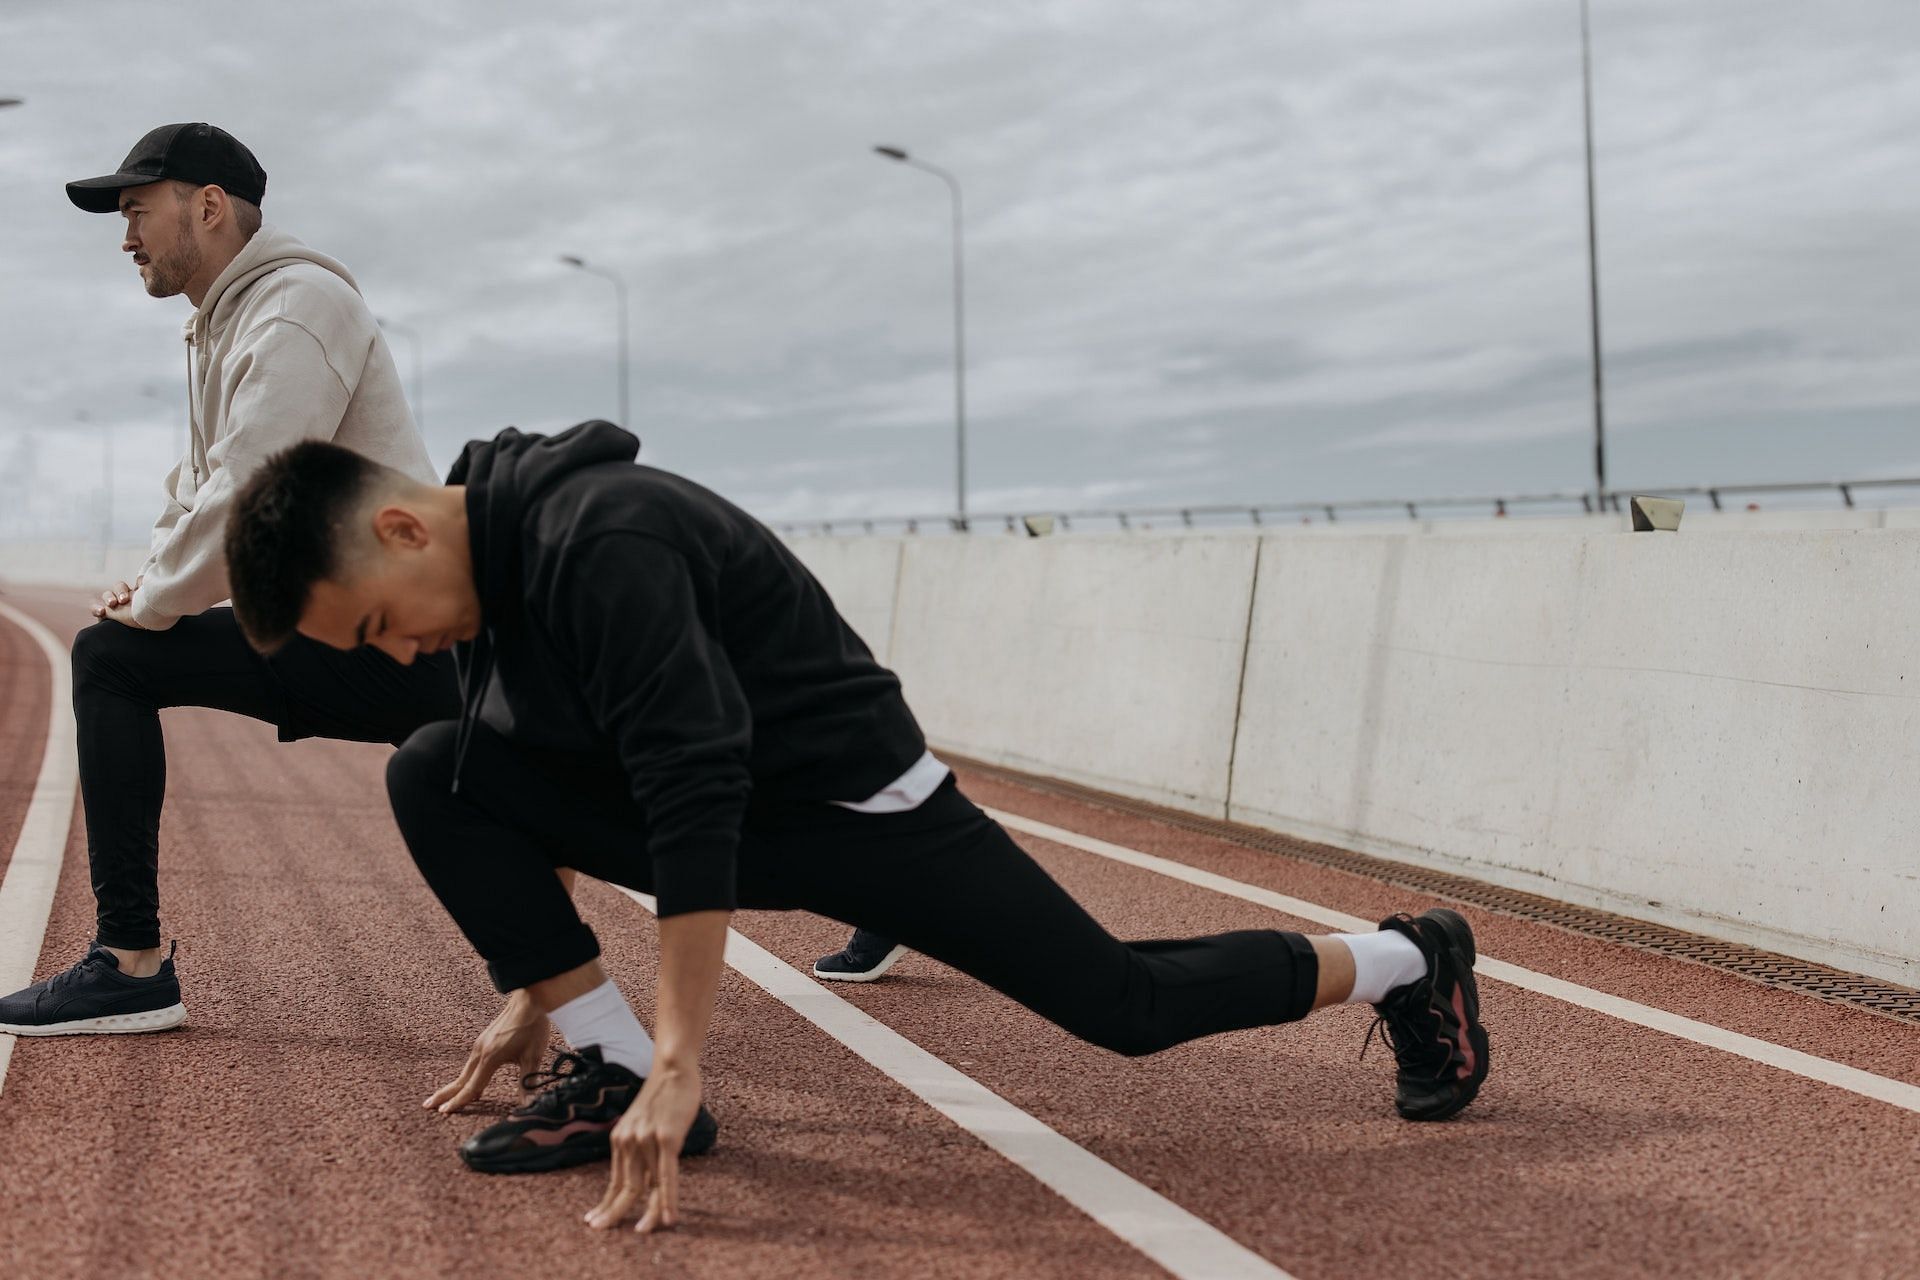 There are several stretches to do before running. (Photo via Pexels/cottonbro studio)